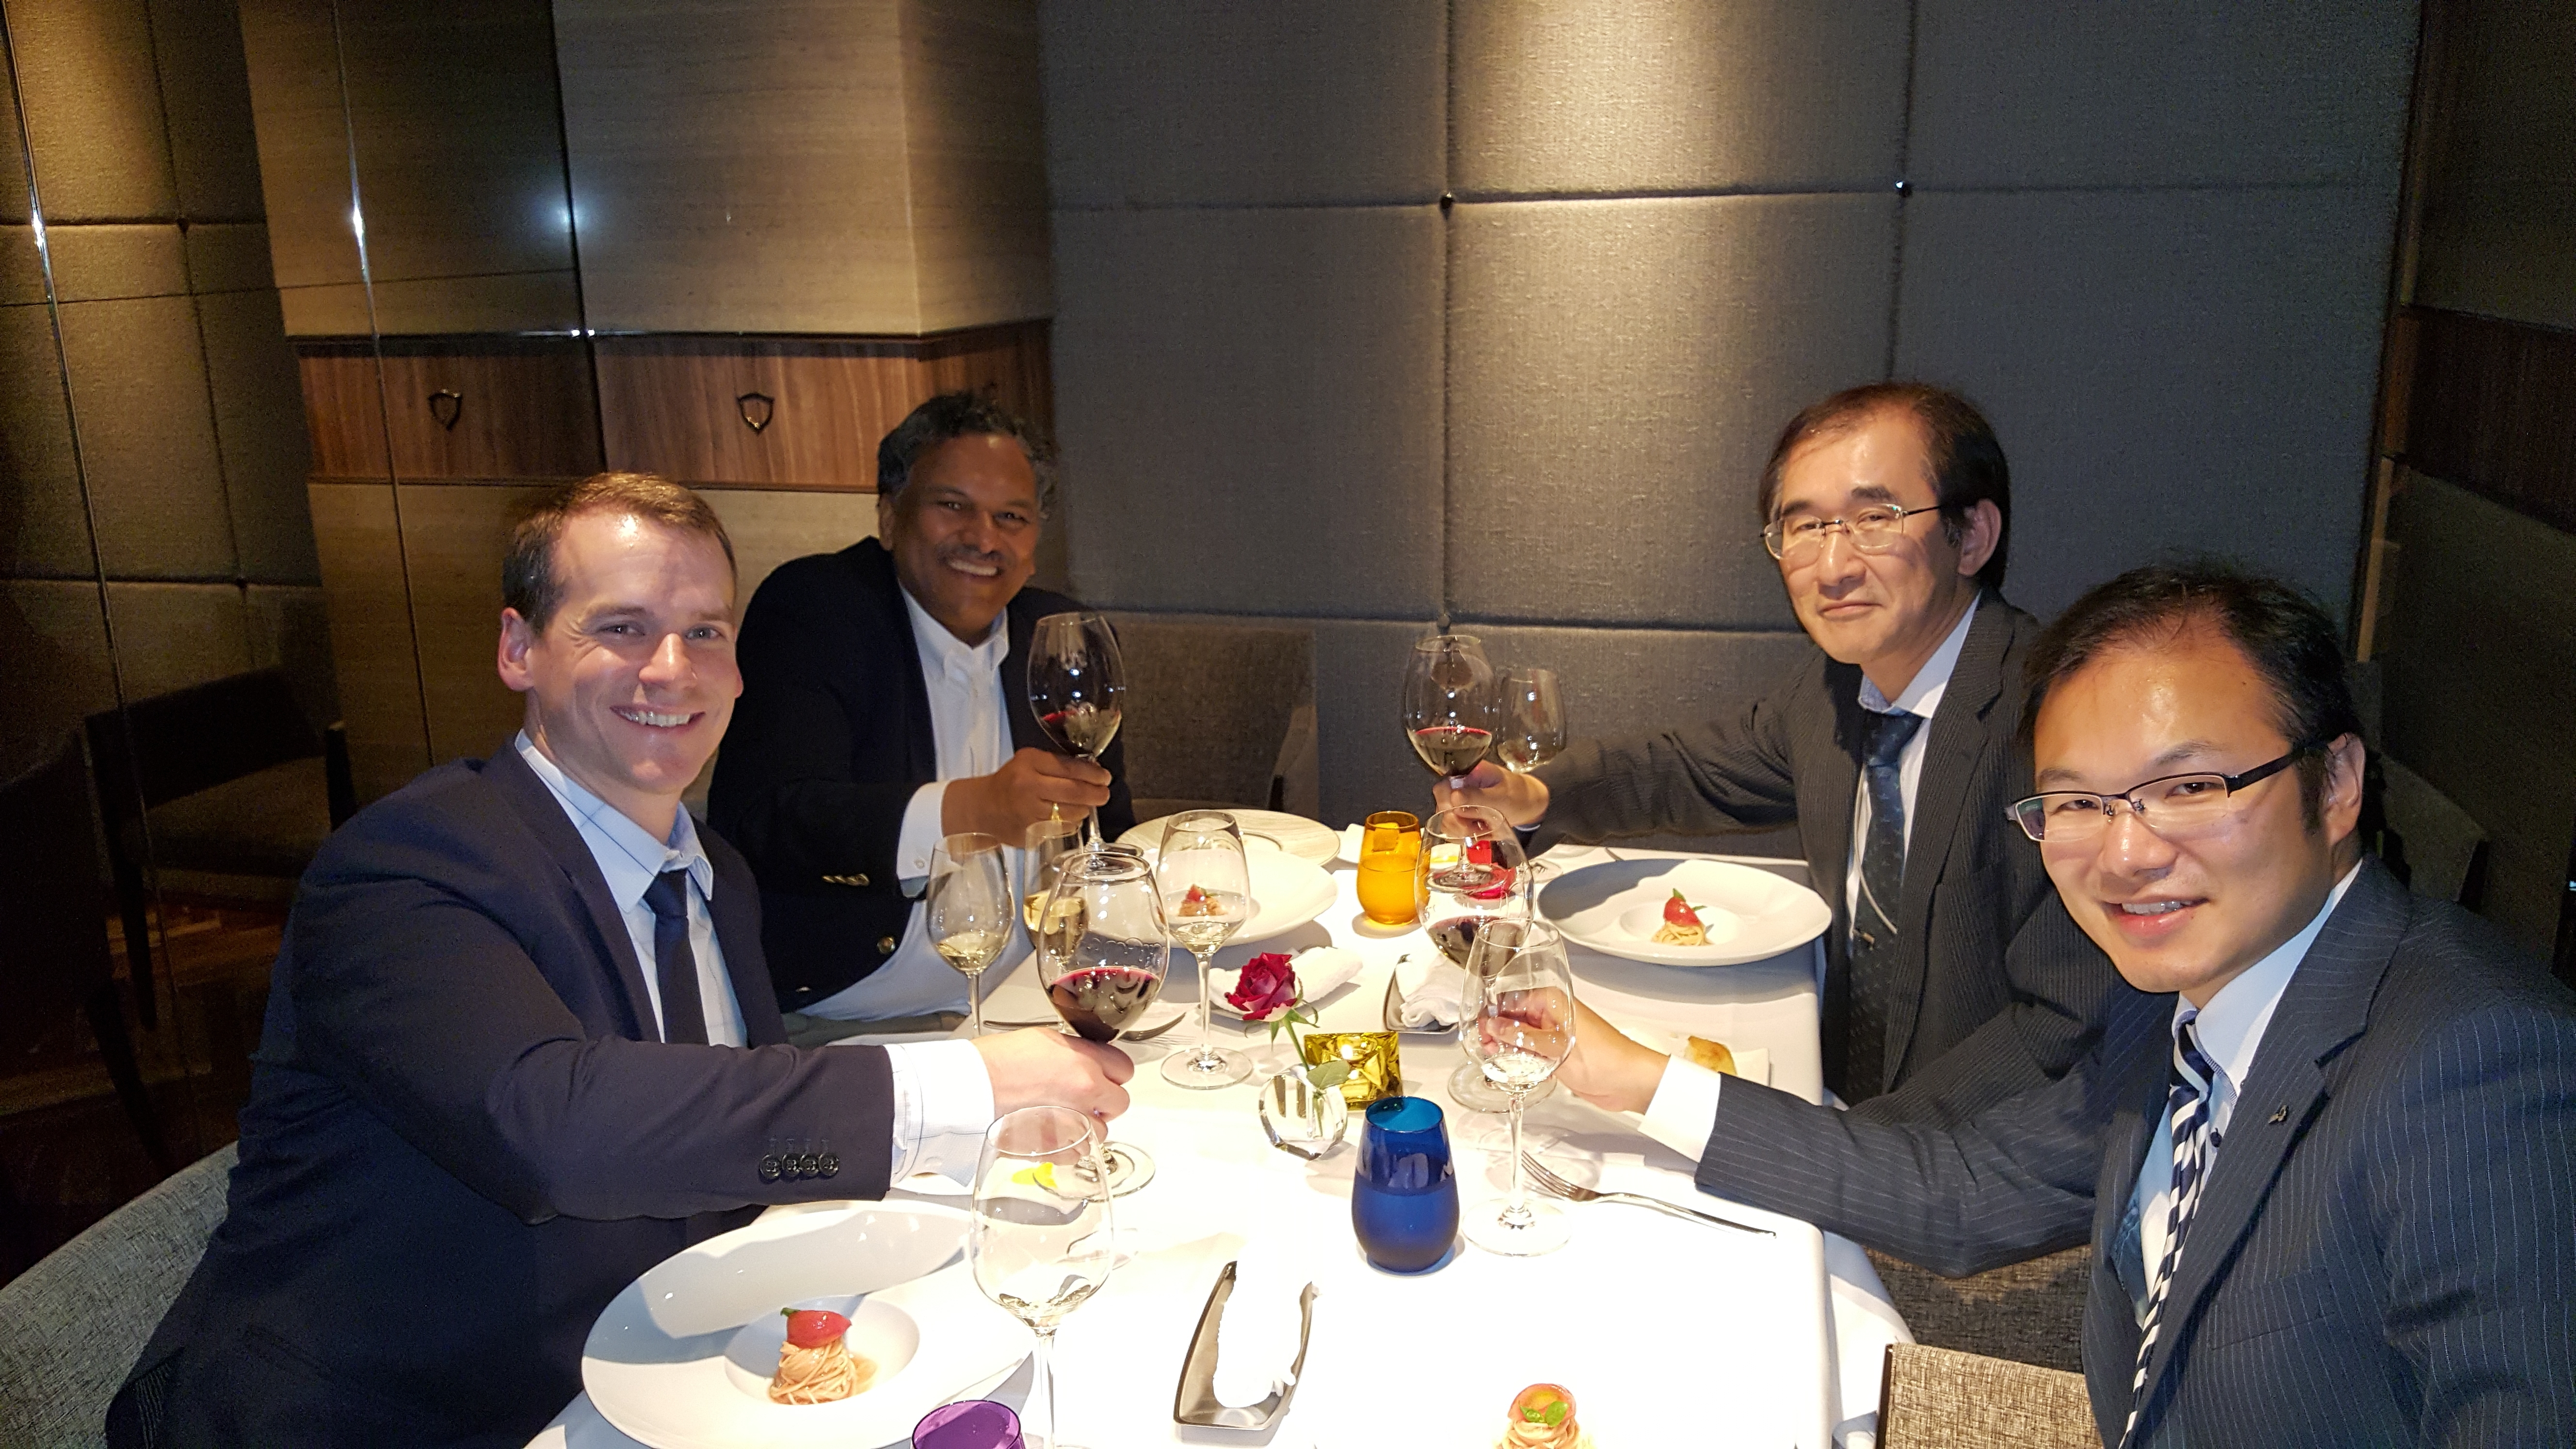 Professor Dravid, JEOL USA's Patrick Phillips and two Japanese JEOL executives toast over a formal dinner